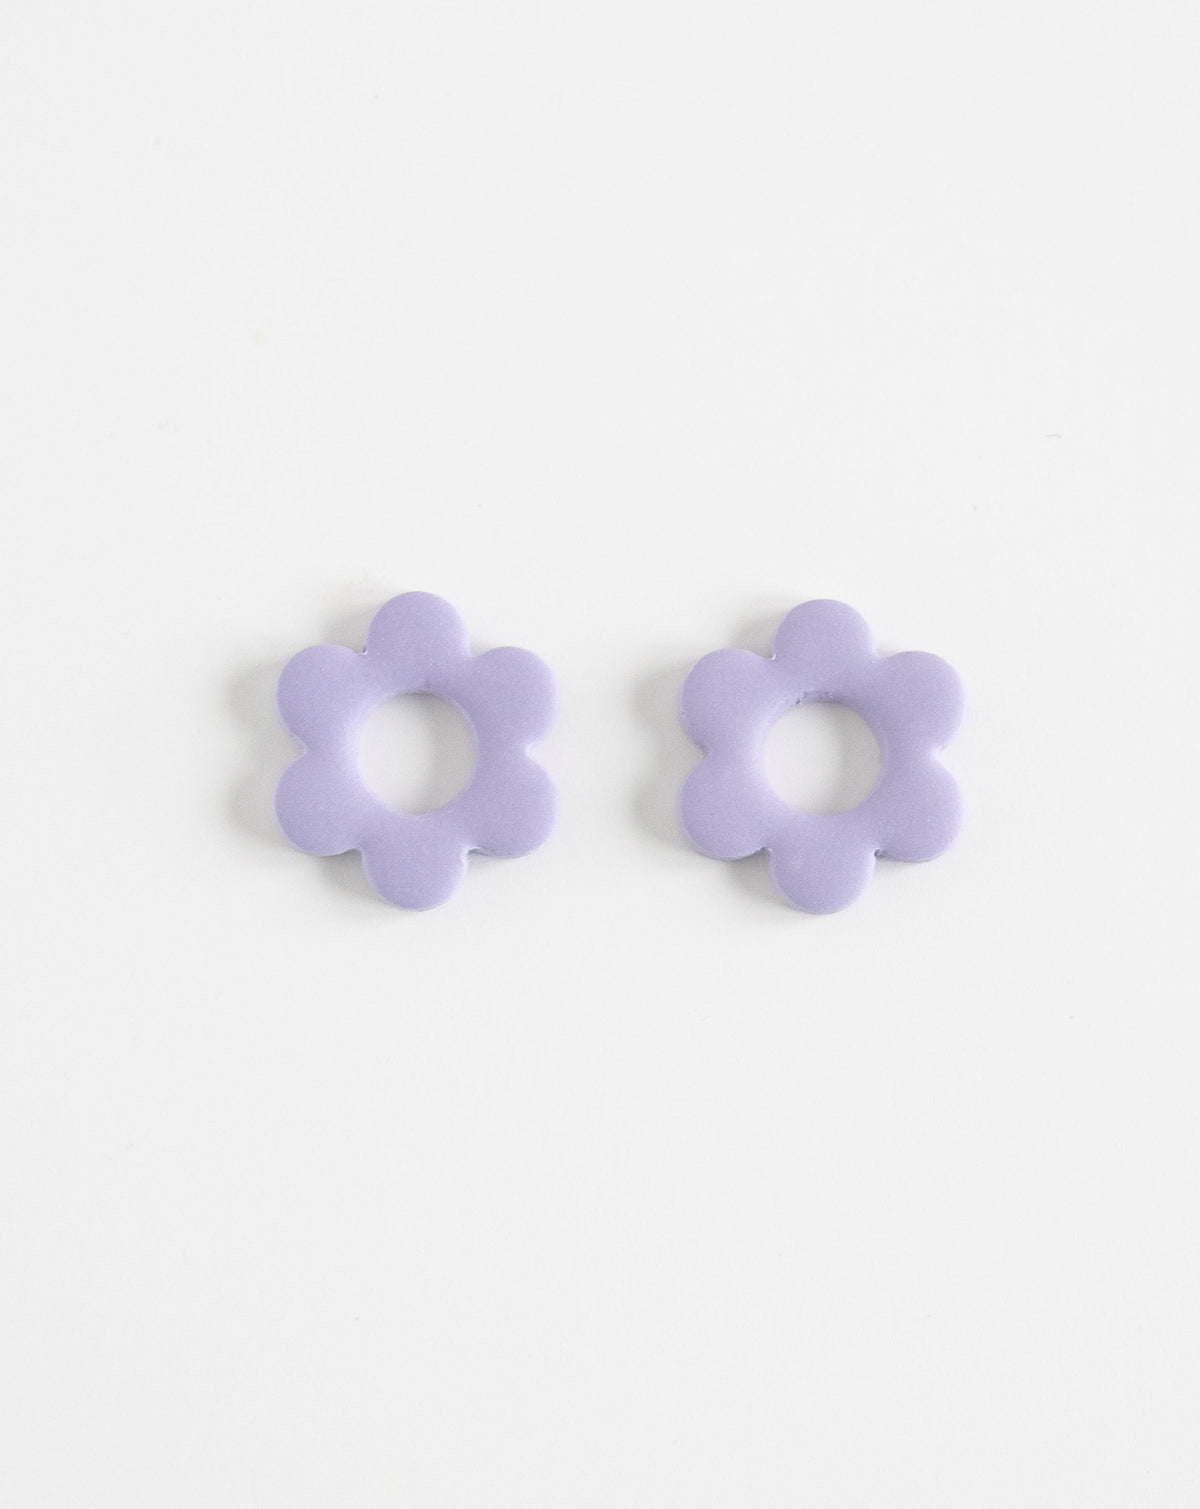 Goli Beads in Lilac color, front view.